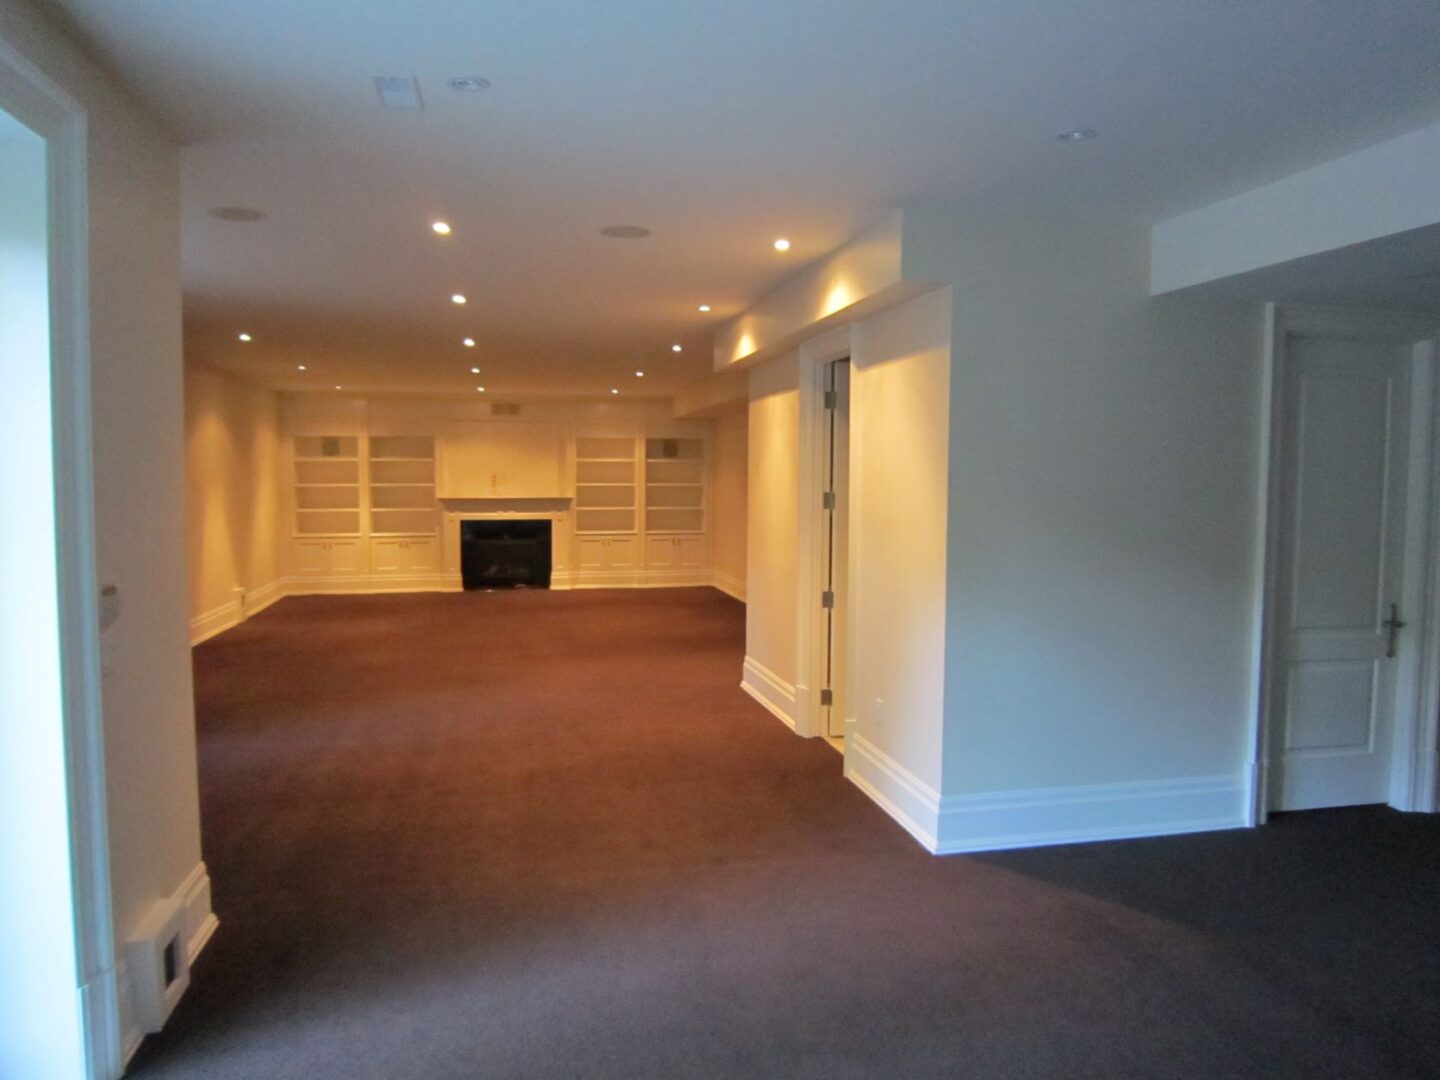 An Empty Room With a Large Cupboards and a Fireplace